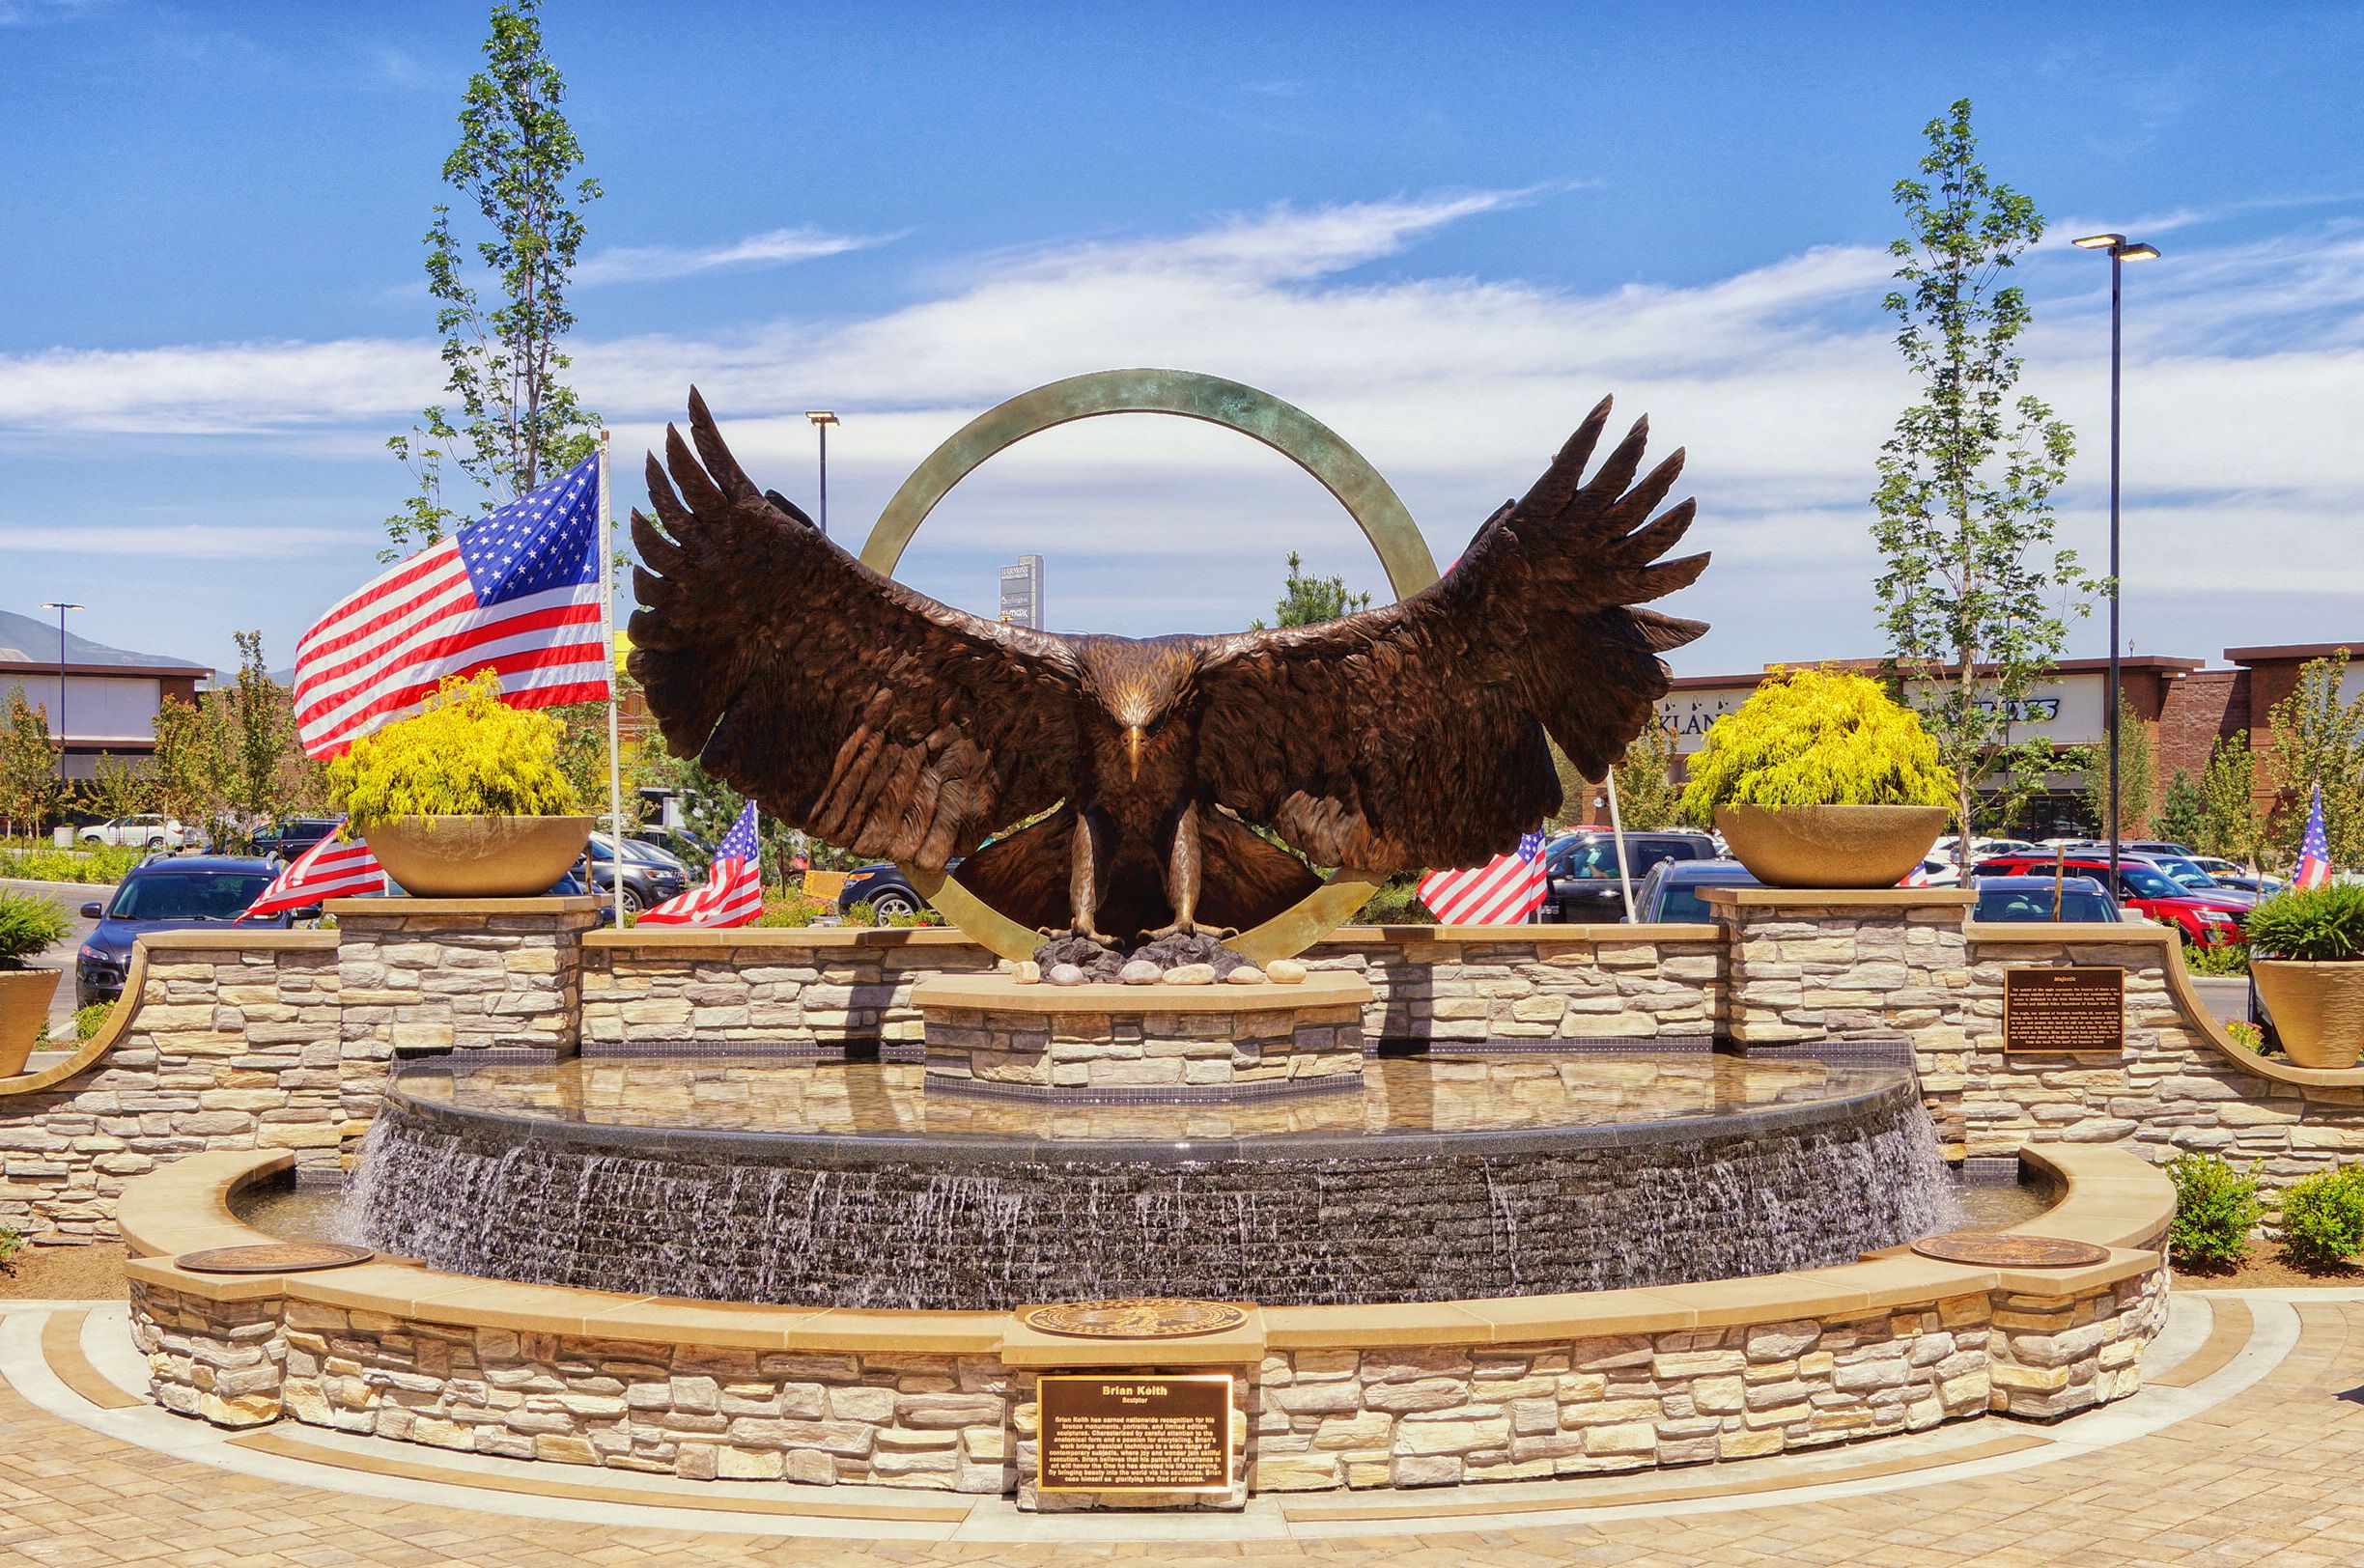 Majestic – 13-foot eagle for Mountain View Village